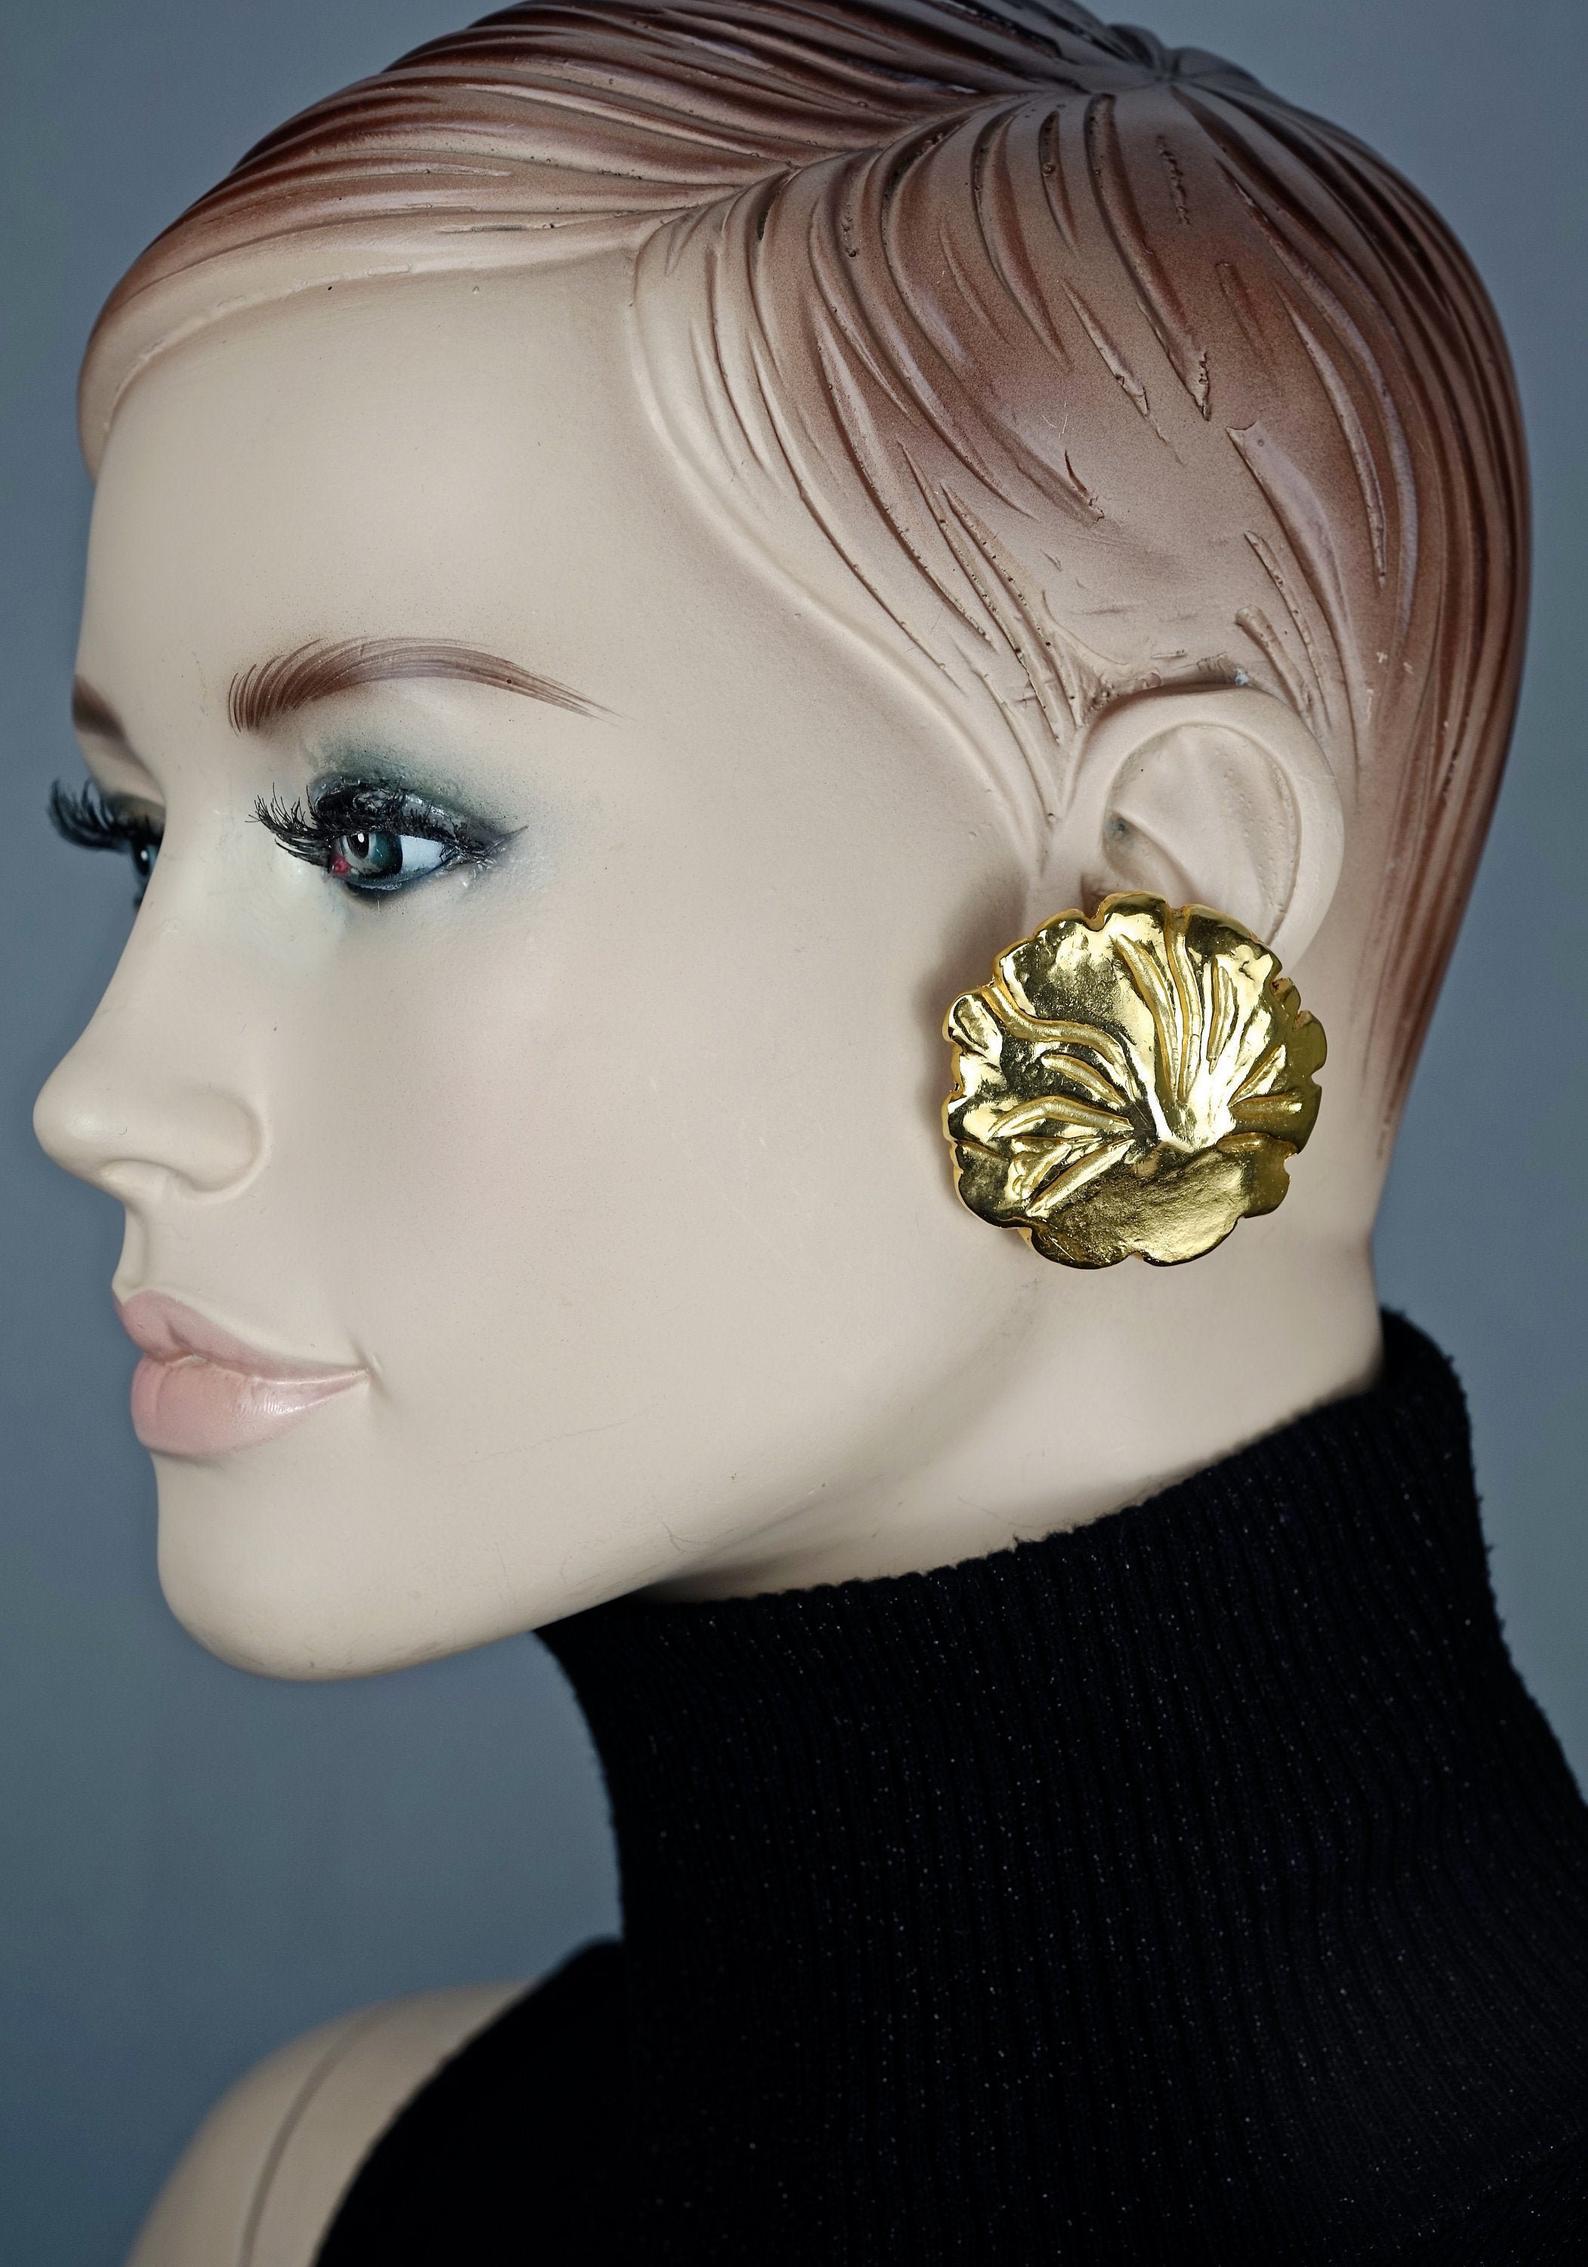 Vintage YVES SAINT LAURENT Ysl Gilt Flower Earrings

Measurements:
Height: 1.77 inches (4.5 cm)
Width: 1.85 inches (4.7 cm)
Weight per Earring: 18 grams

Features:
- 100% Authentic YVES SAINT LAURENT.
- Chunky gilt flower earrings.
- Clip back